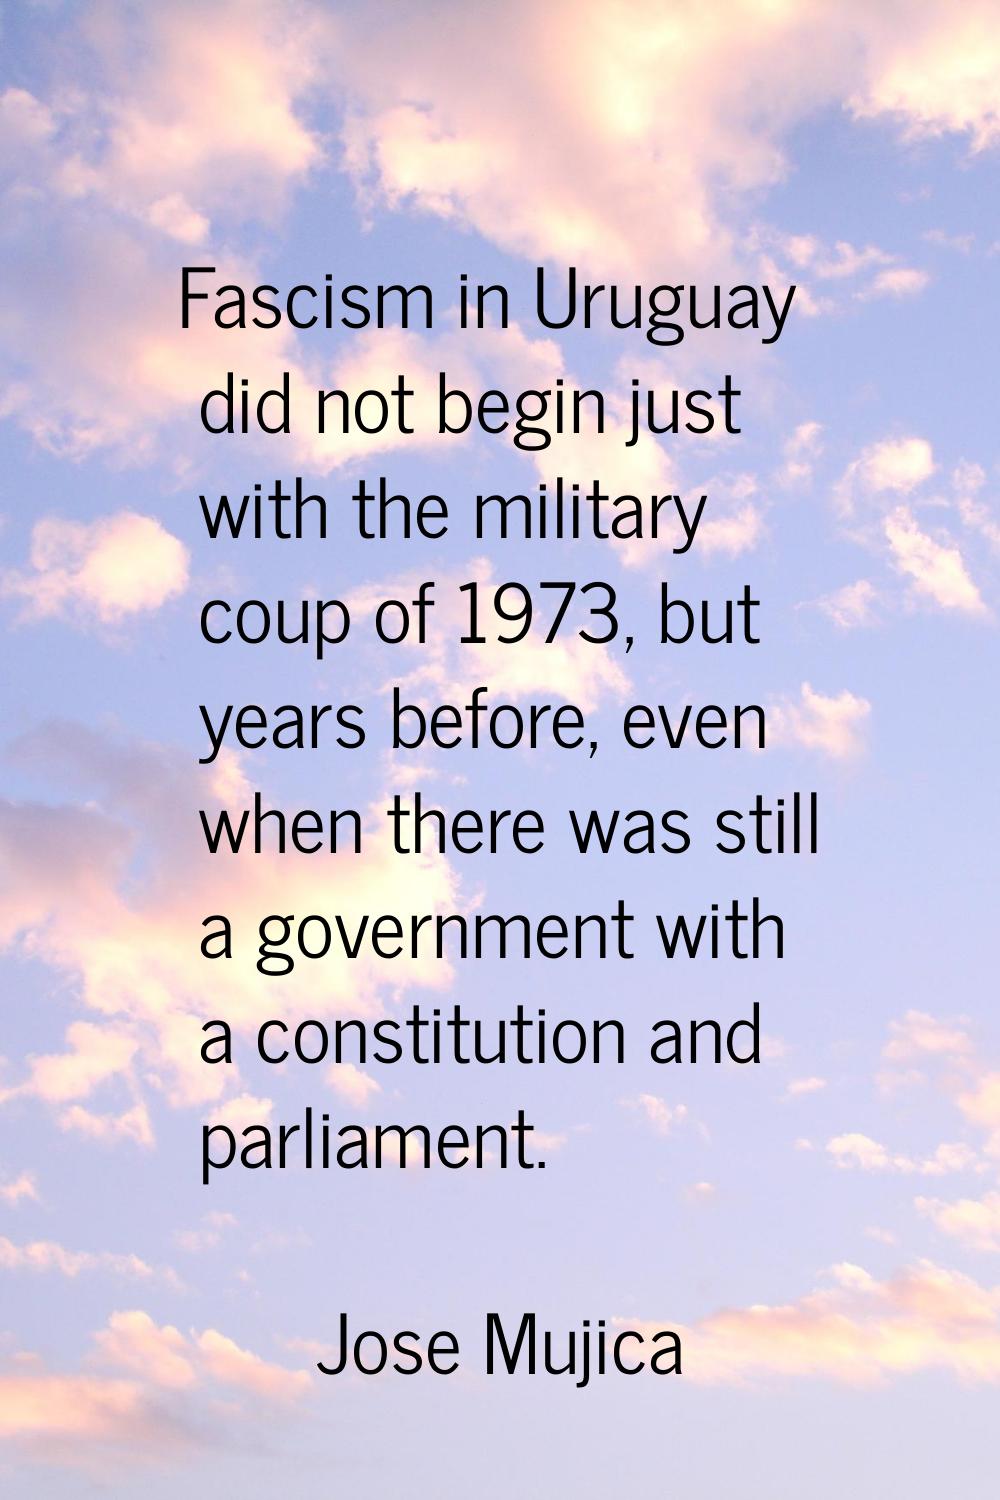 Fascism in Uruguay did not begin just with the military coup of 1973, but years before, even when t